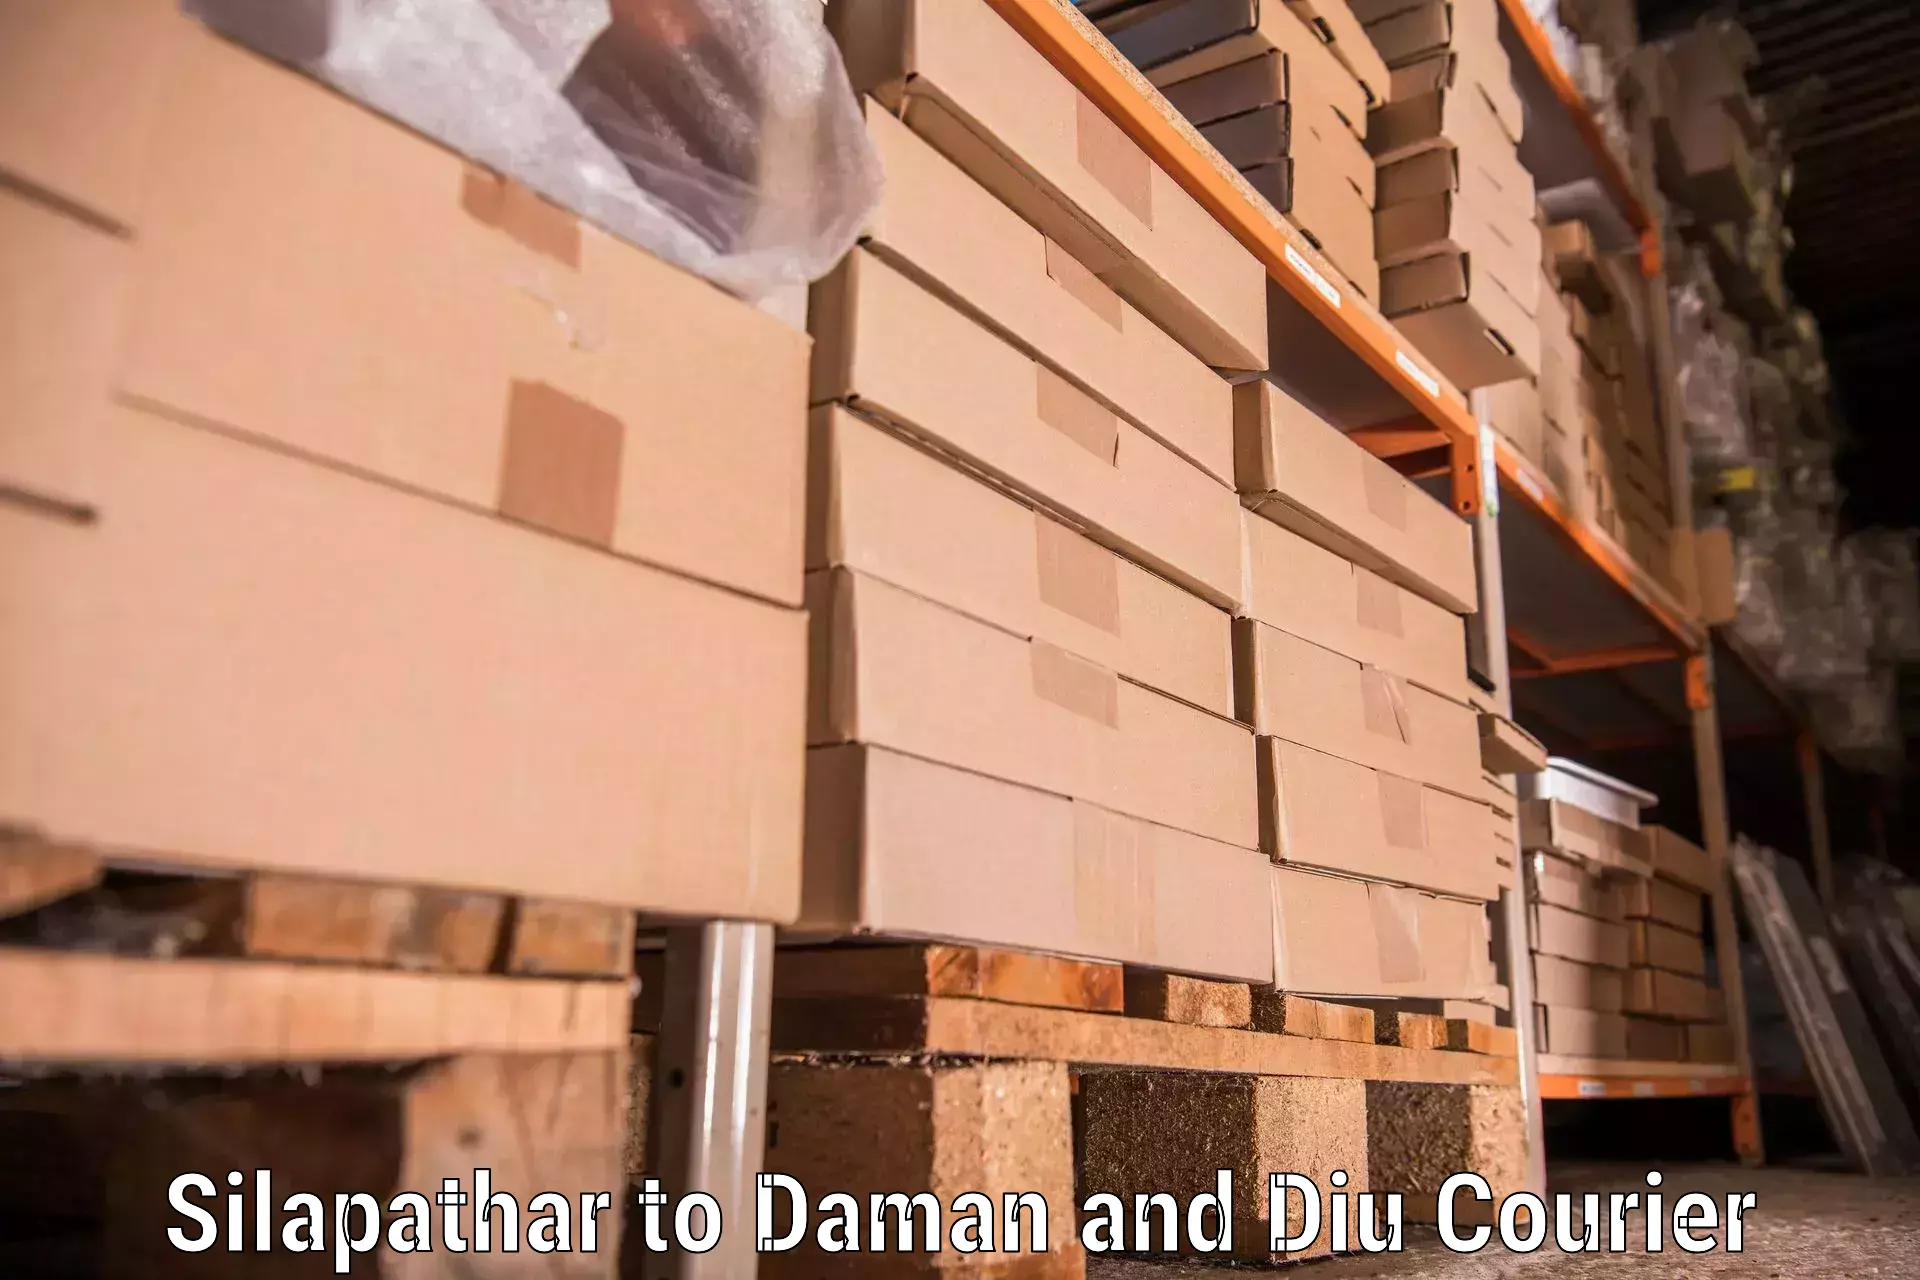 Moving and handling services Silapathar to Daman and Diu